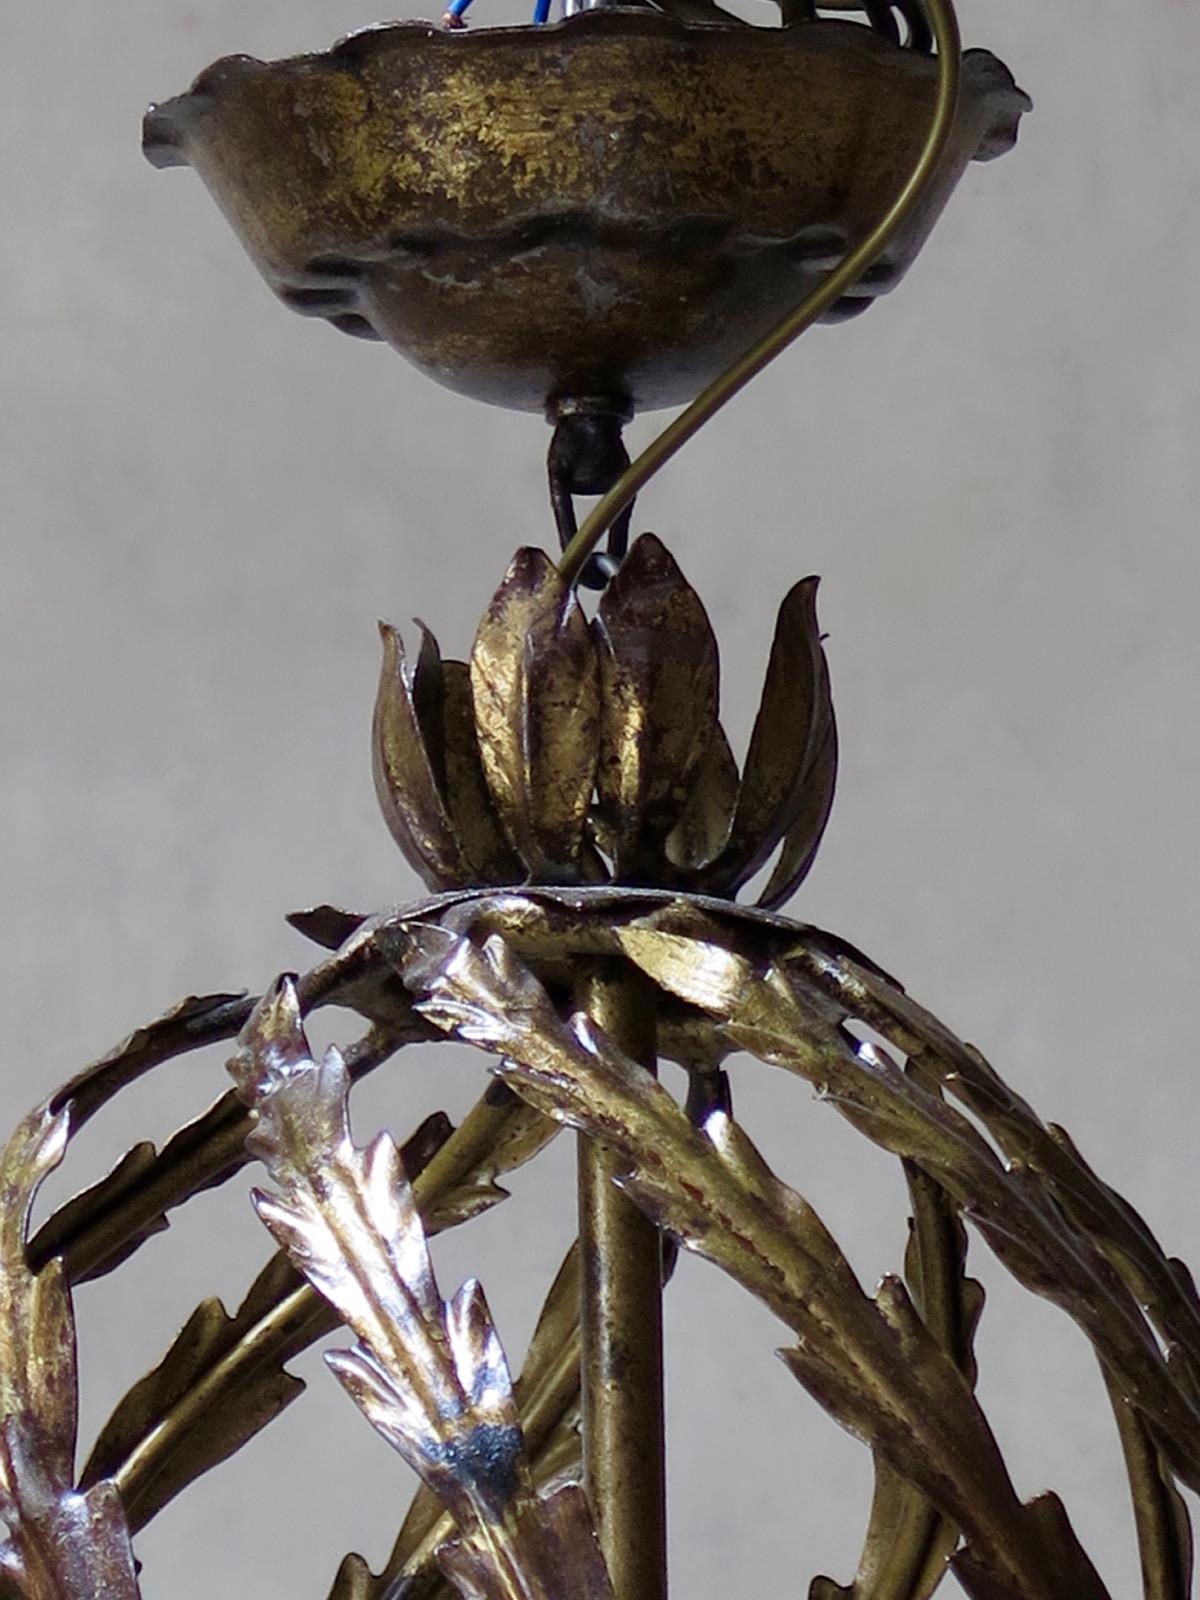 French midcentury gilt iron chandelier, with an elegant, bulbous centre part composed of multiple twirling rods, adorned with leaves. The arms extend down and out in an elegant, sweeping movement.